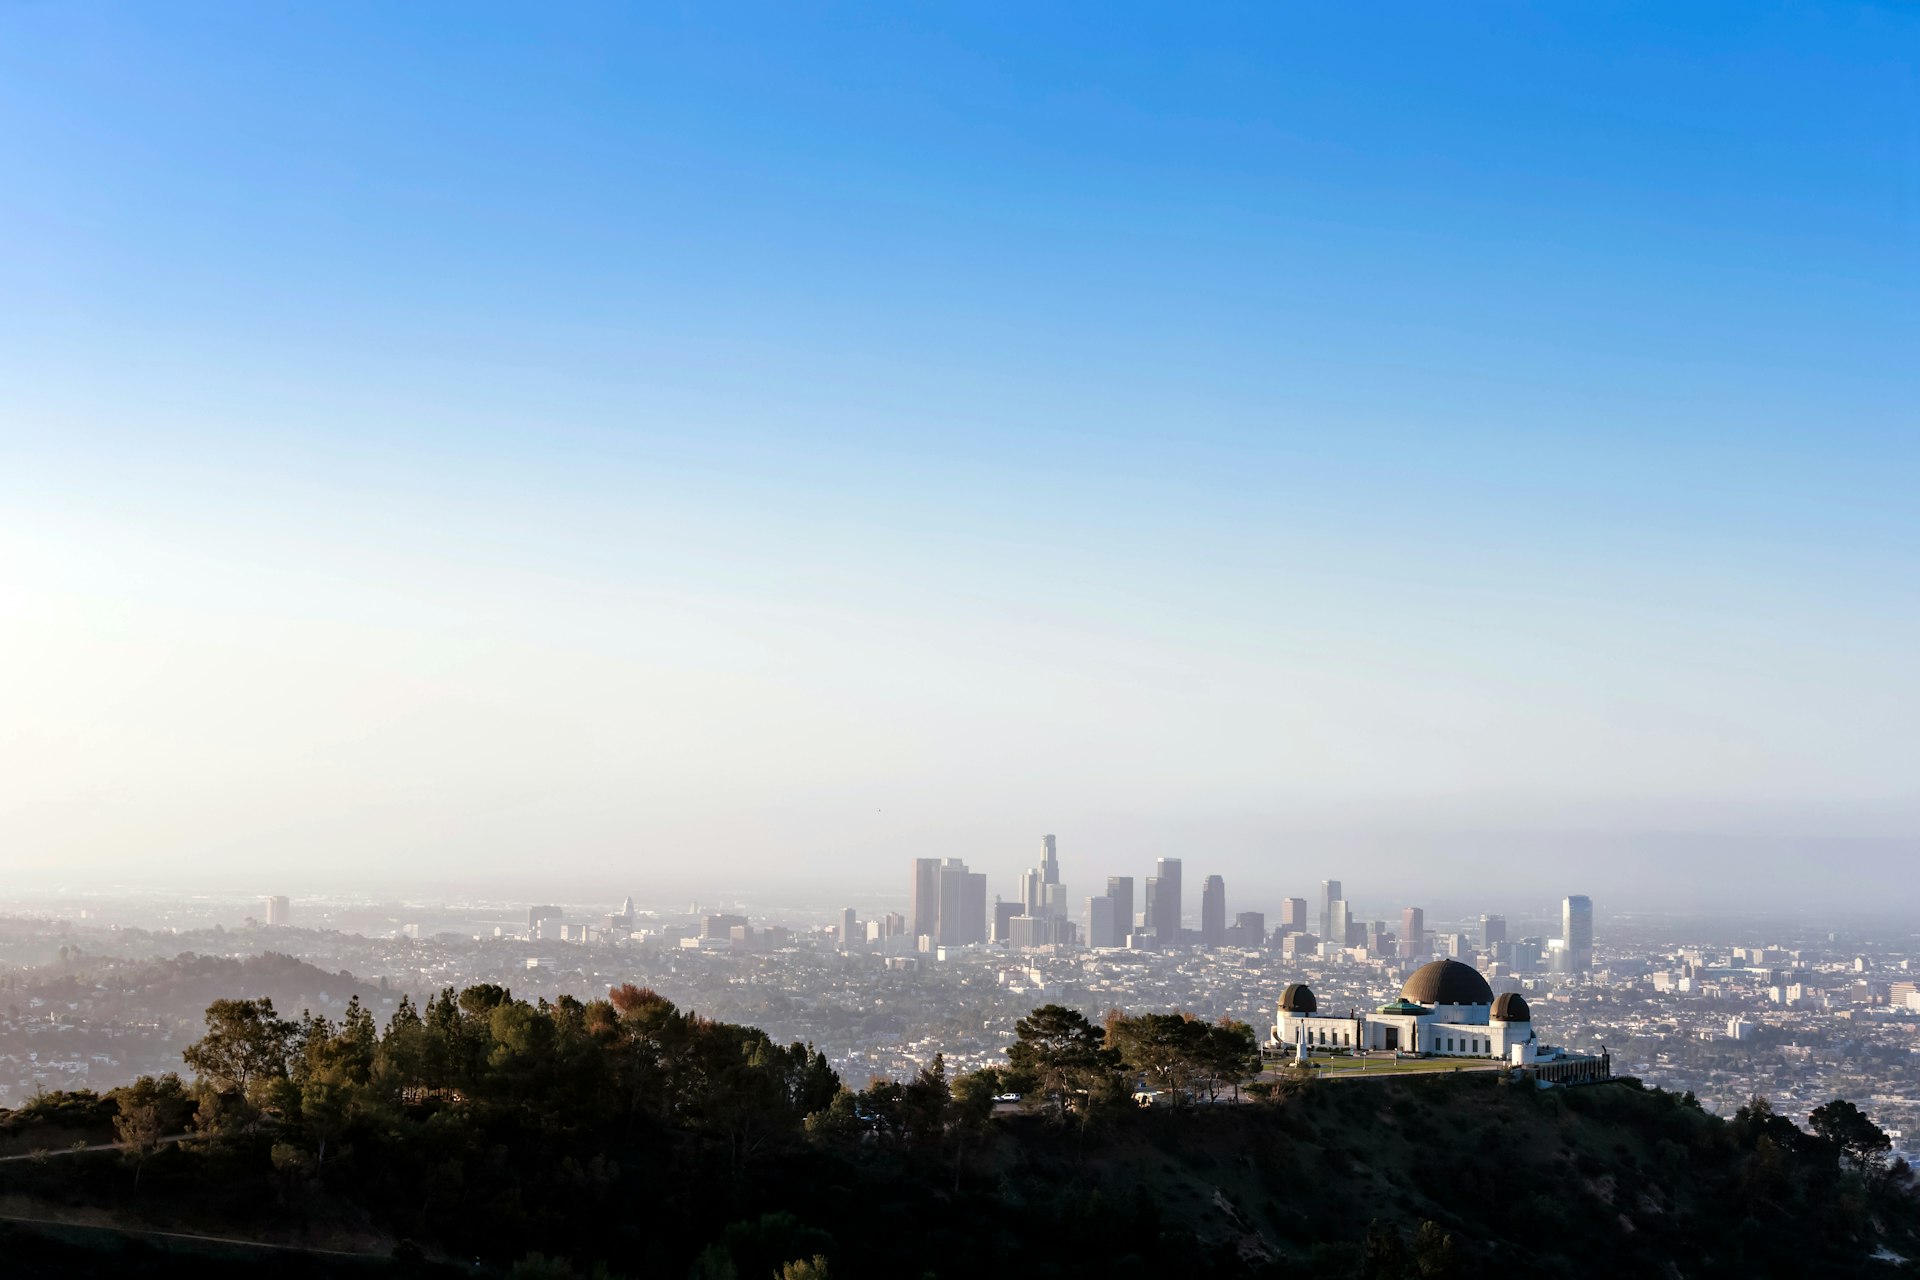 Blue skies over Griffith Observatory, with Los Angeles in the background